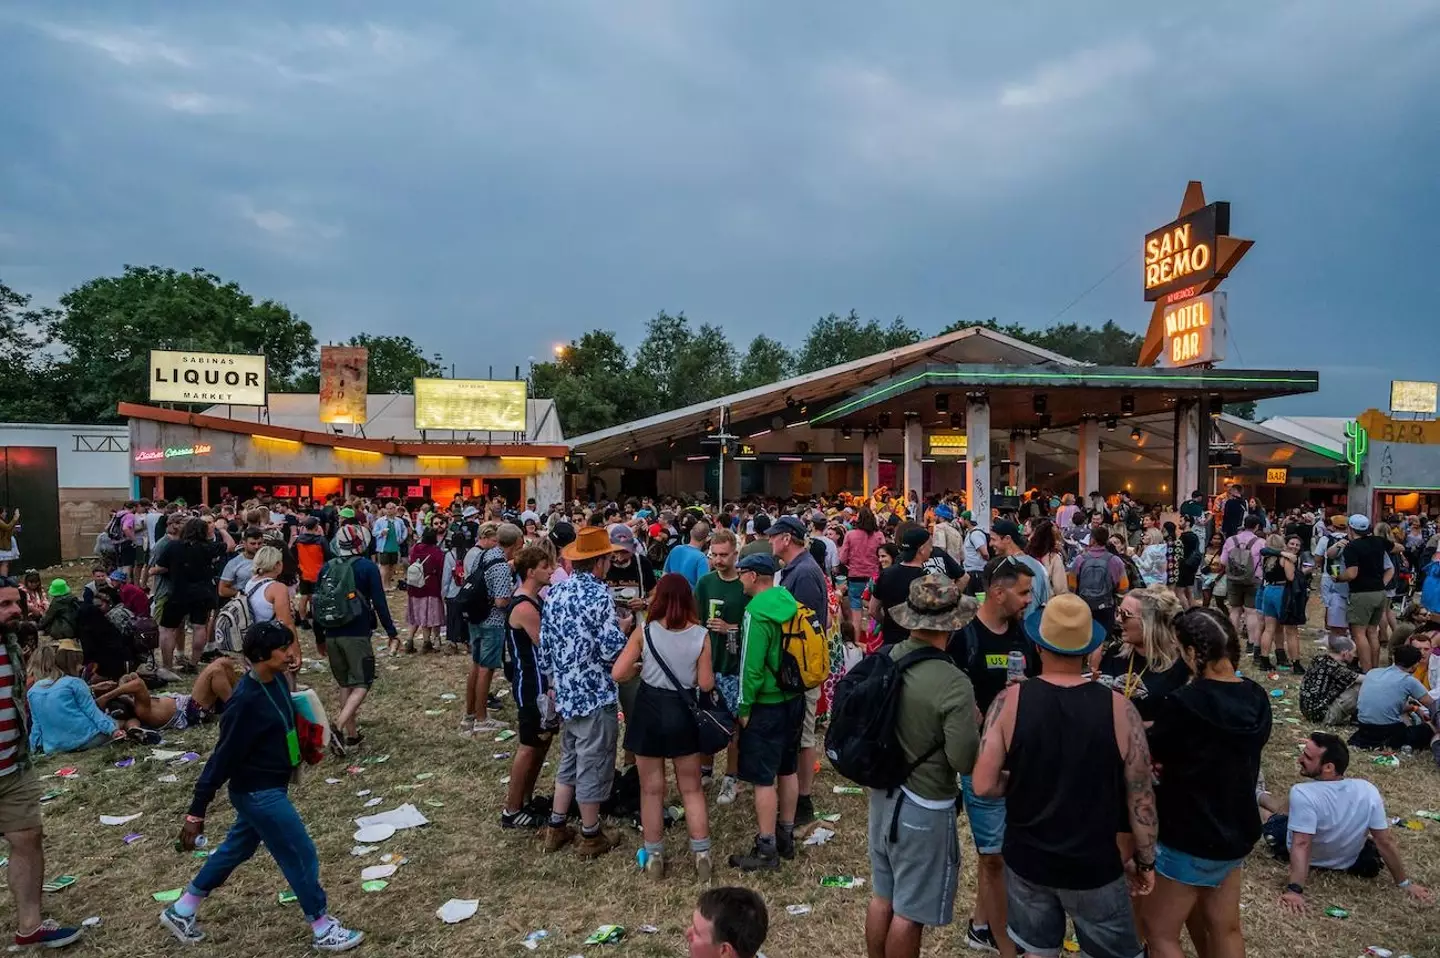 Festivalgoers at Glastonbury were furious as bars reportedly went cash-only, sparking absolute 'chaos'.